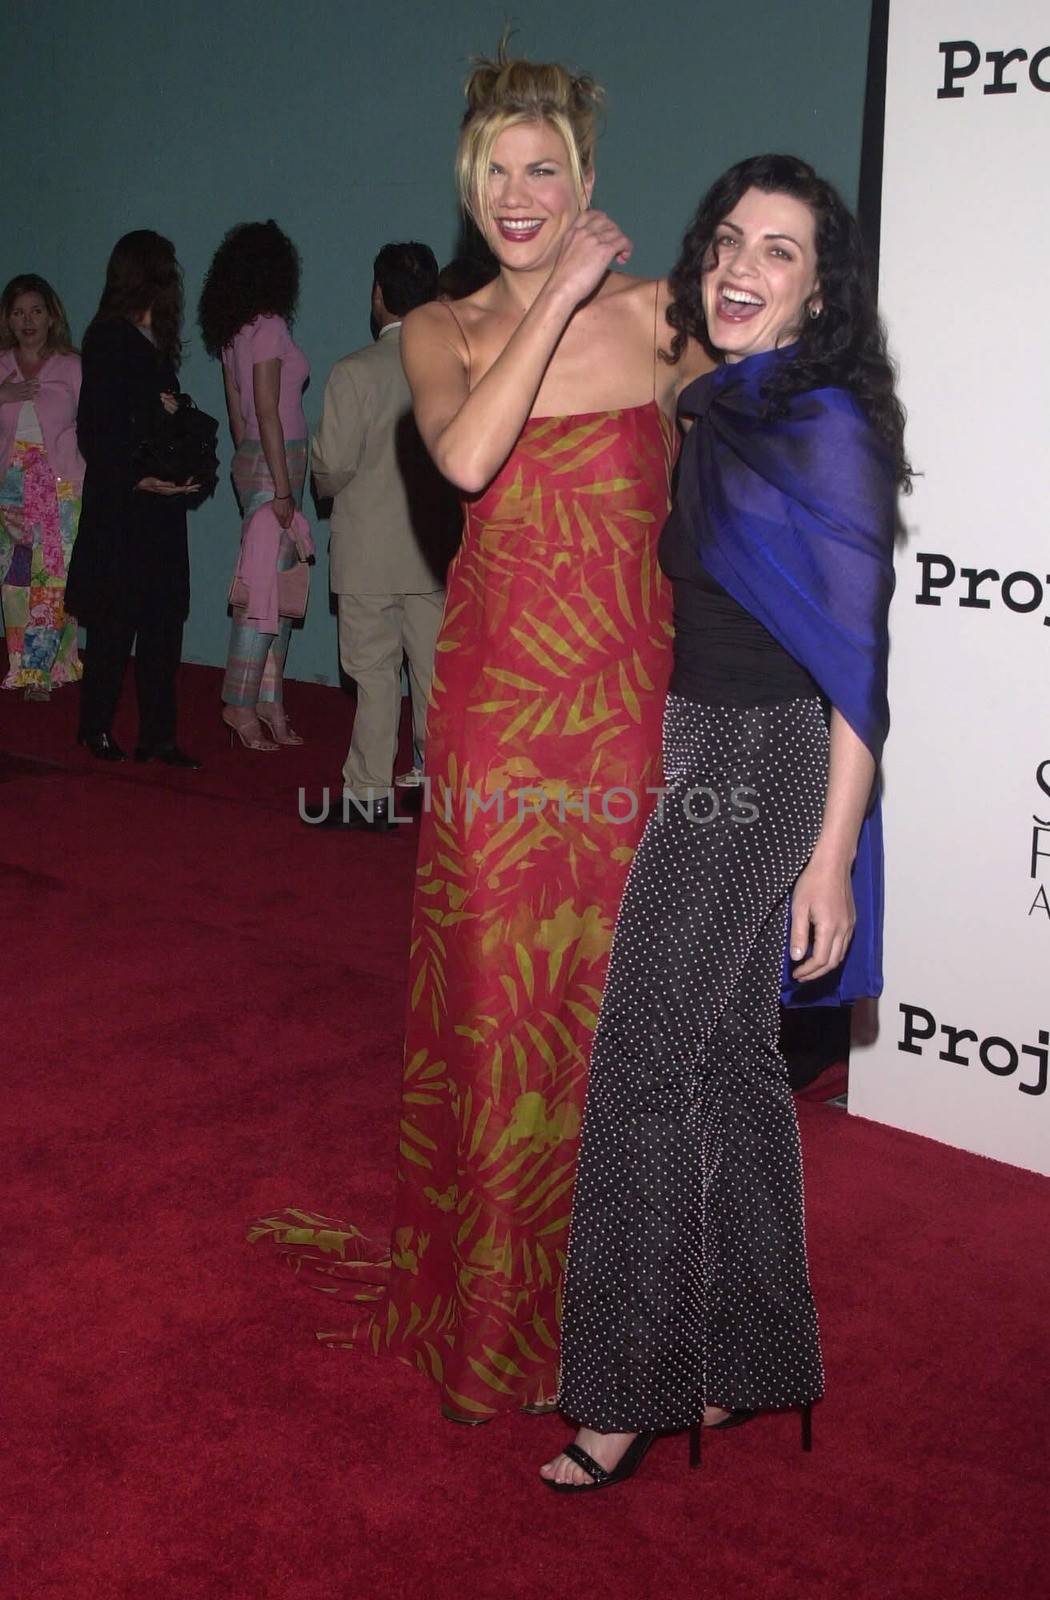 Kirsten Johnston and Julianna Margulies at the 2nd Annual ALS Benefit at the Hollywood Palladium, 04-10-00